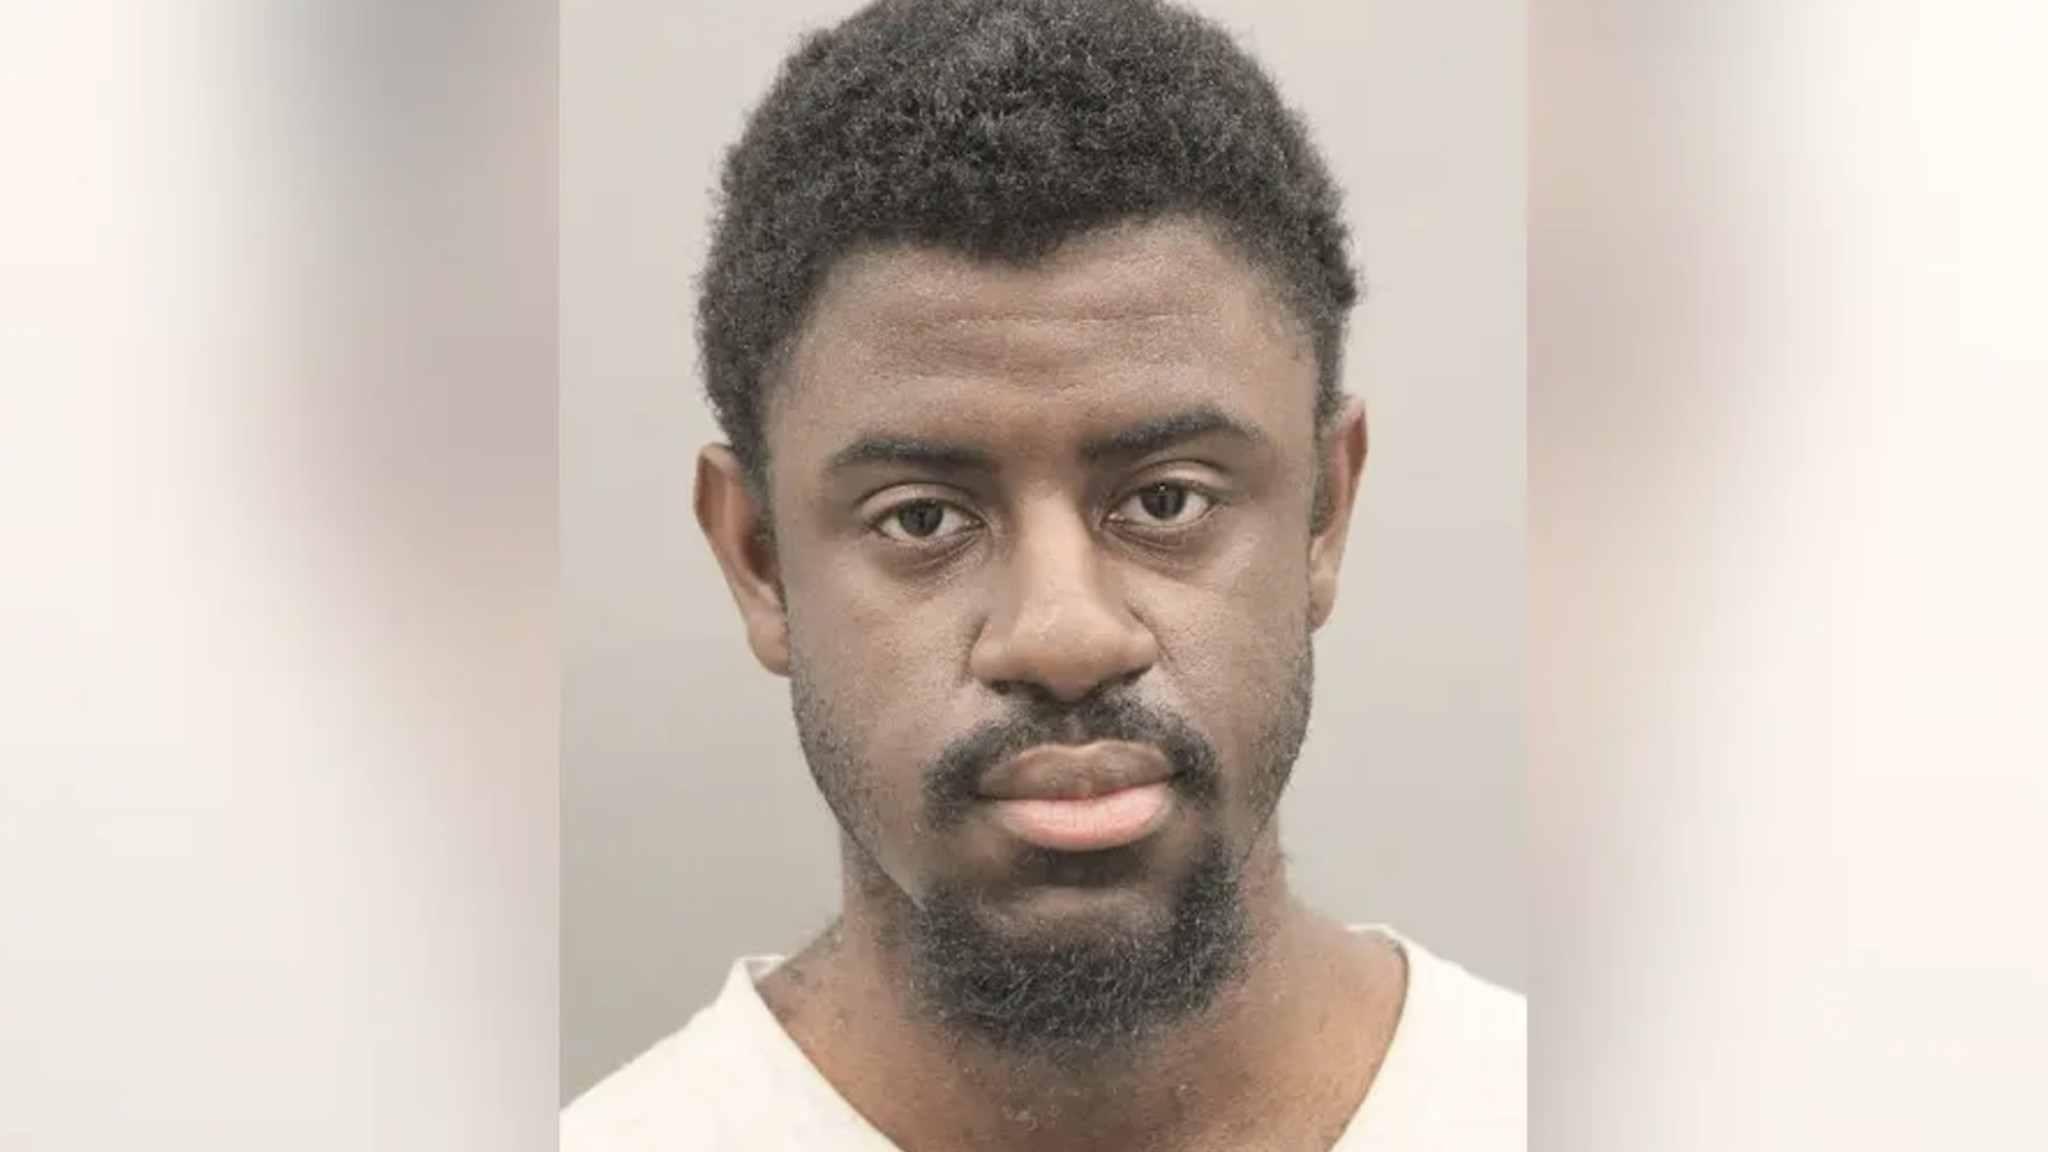 Isaac A. Nformangum is accused of leaving a death threat in a call to Texas Sen. Ted Cruz's office last month